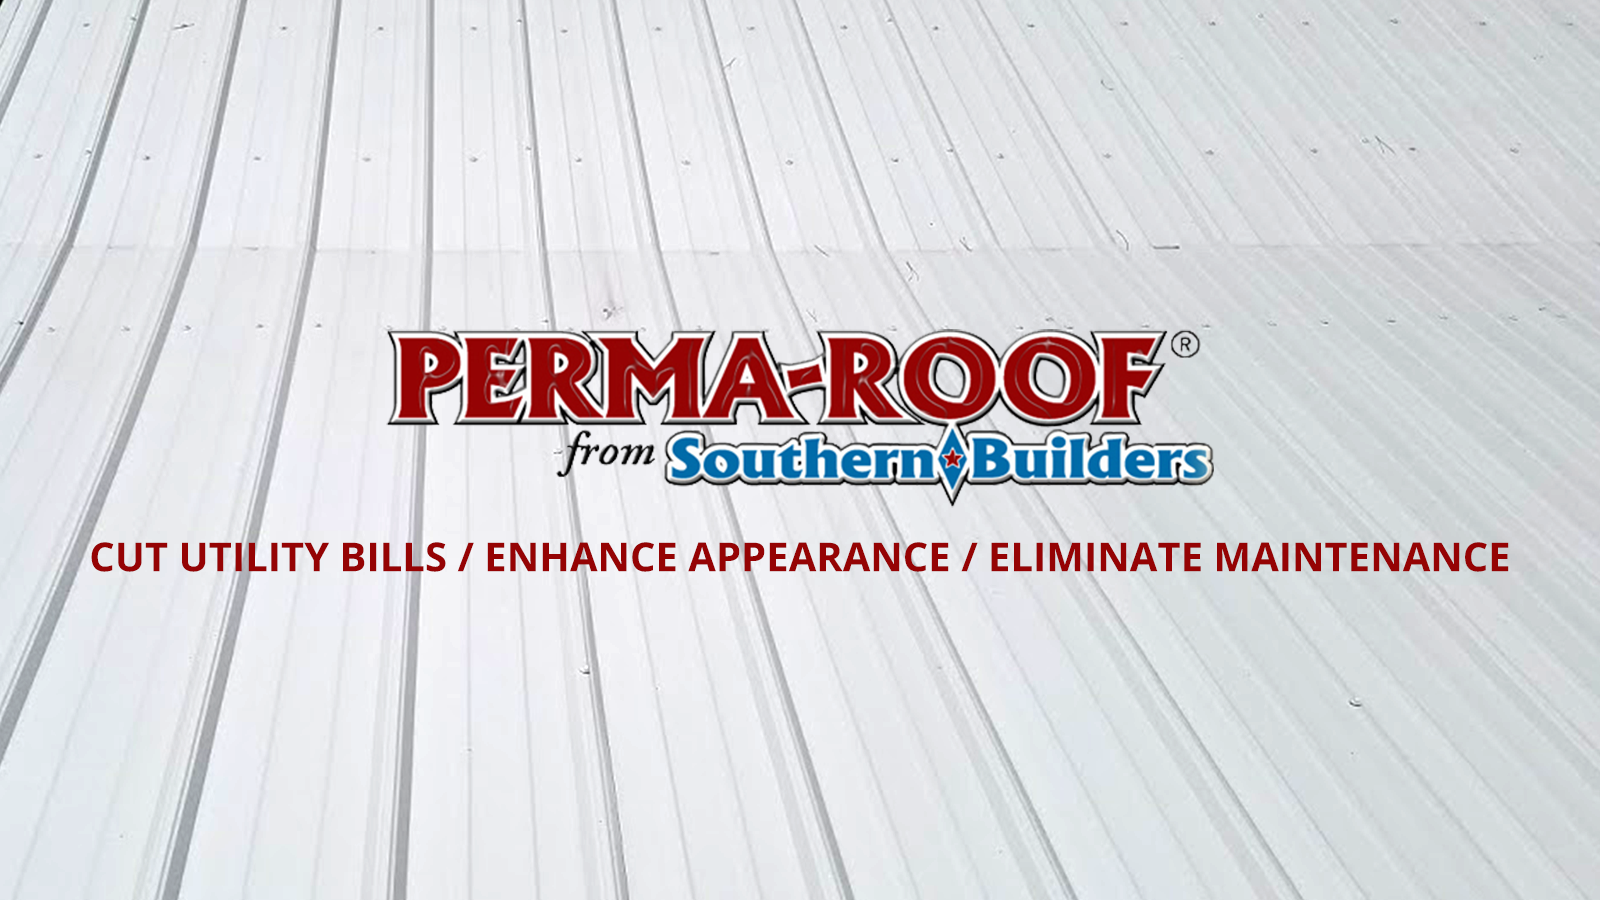 Southern Builders Perma-Roof Installing in 16 States